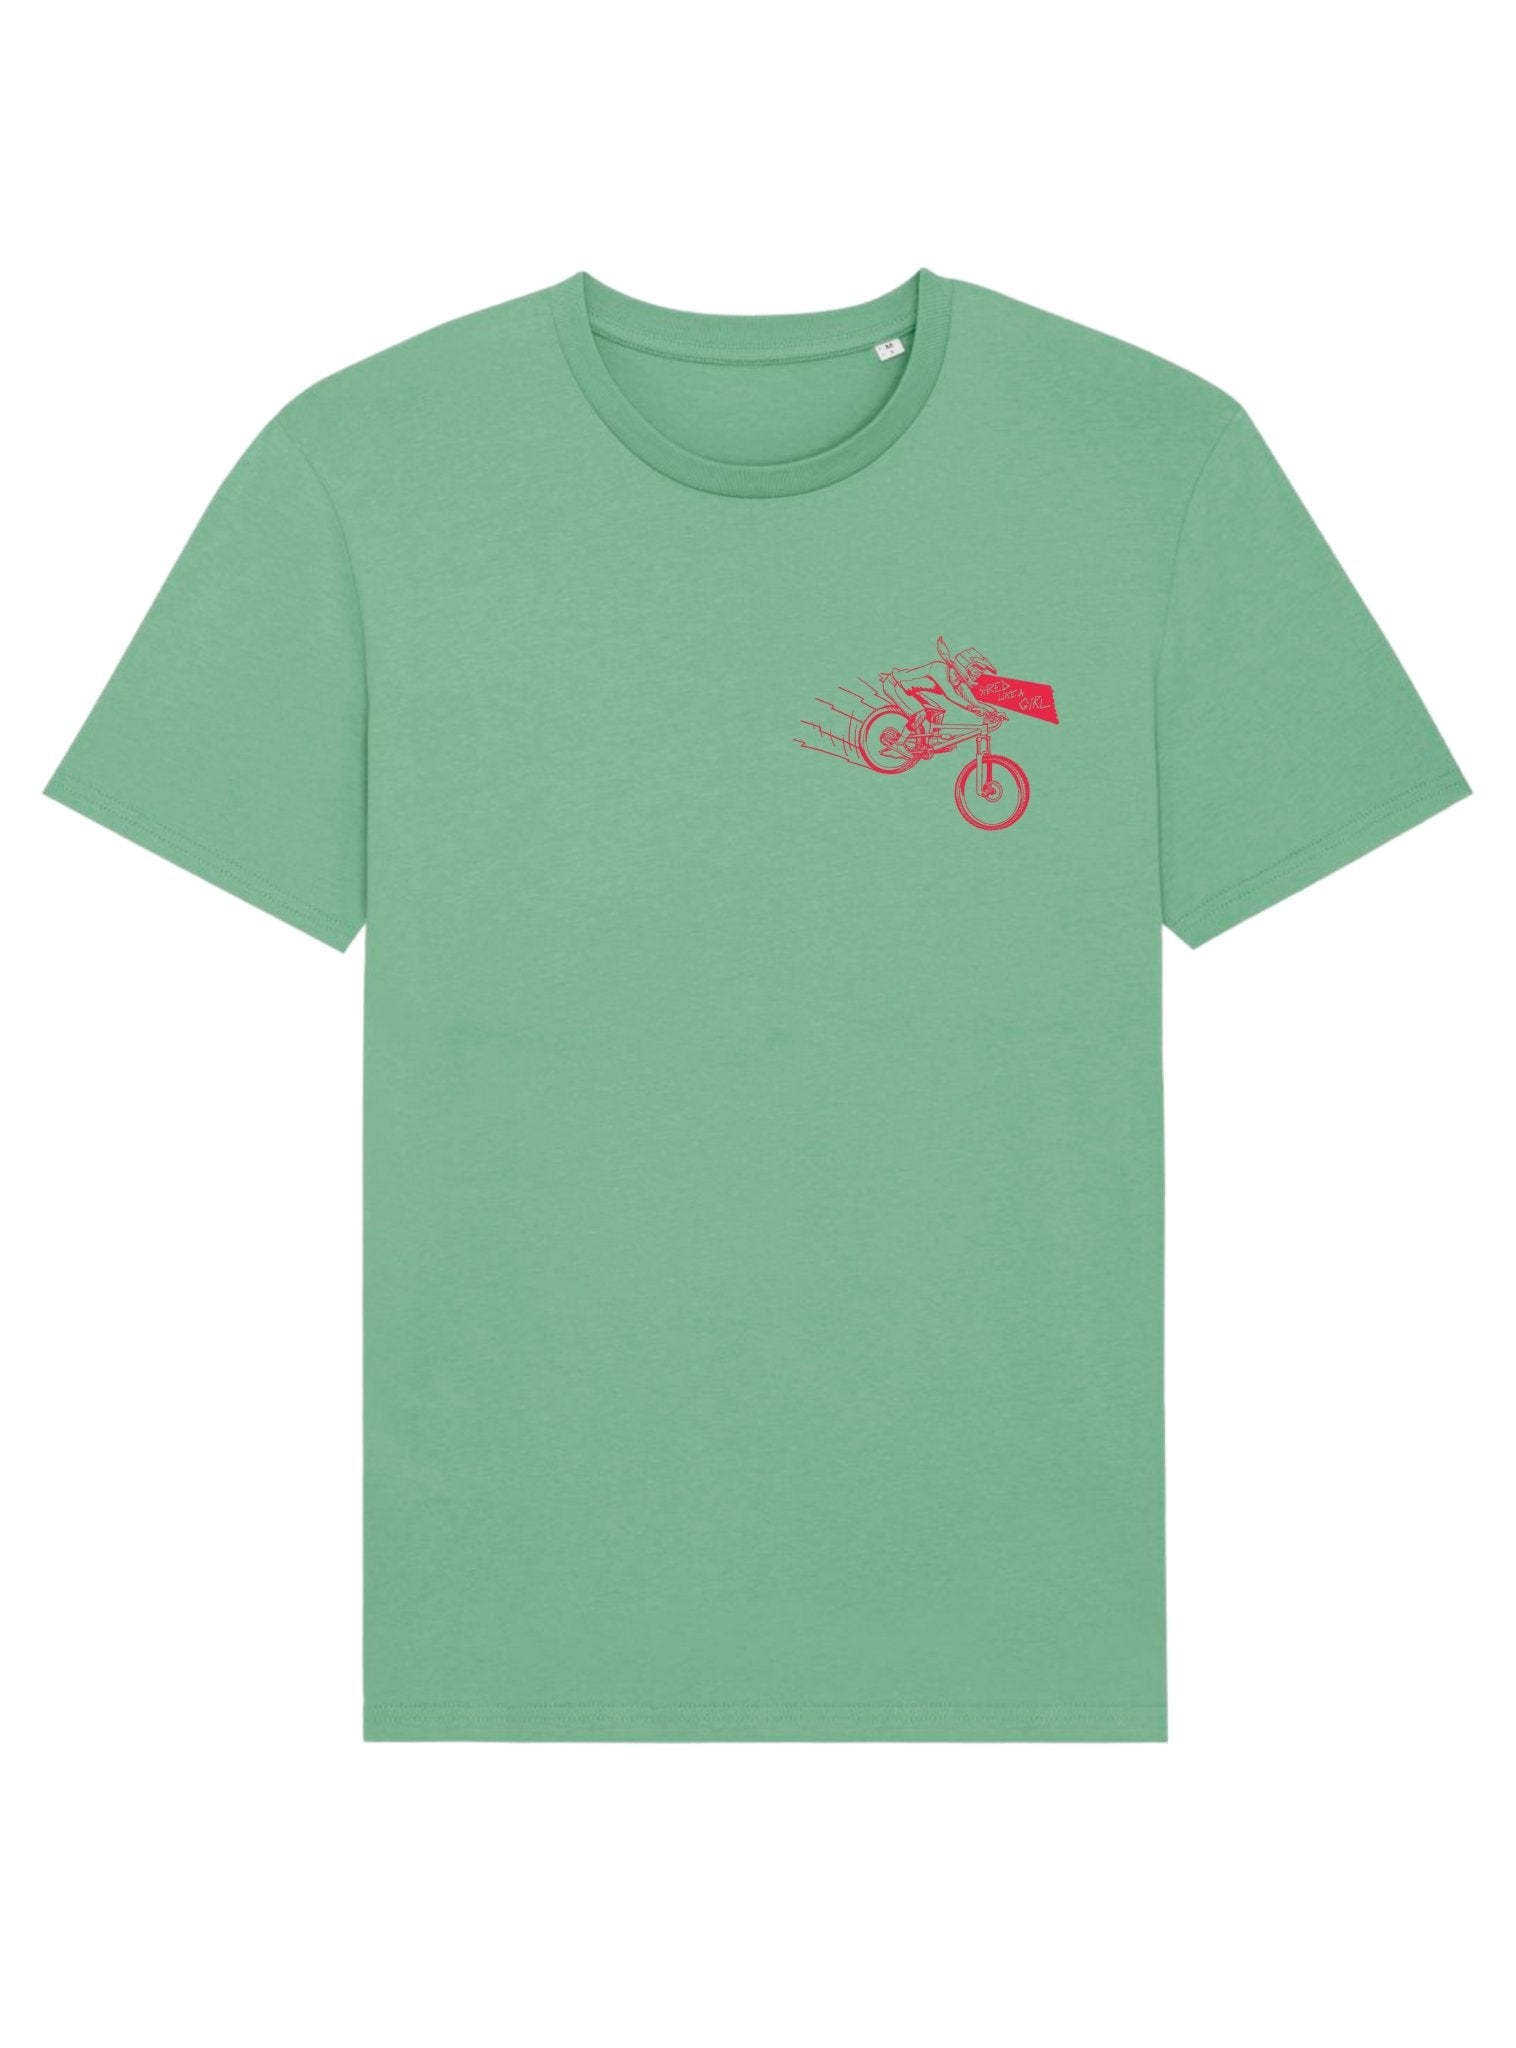 Shred Clothing | Progression Tee | Mint with Red - Shred Like a Girl